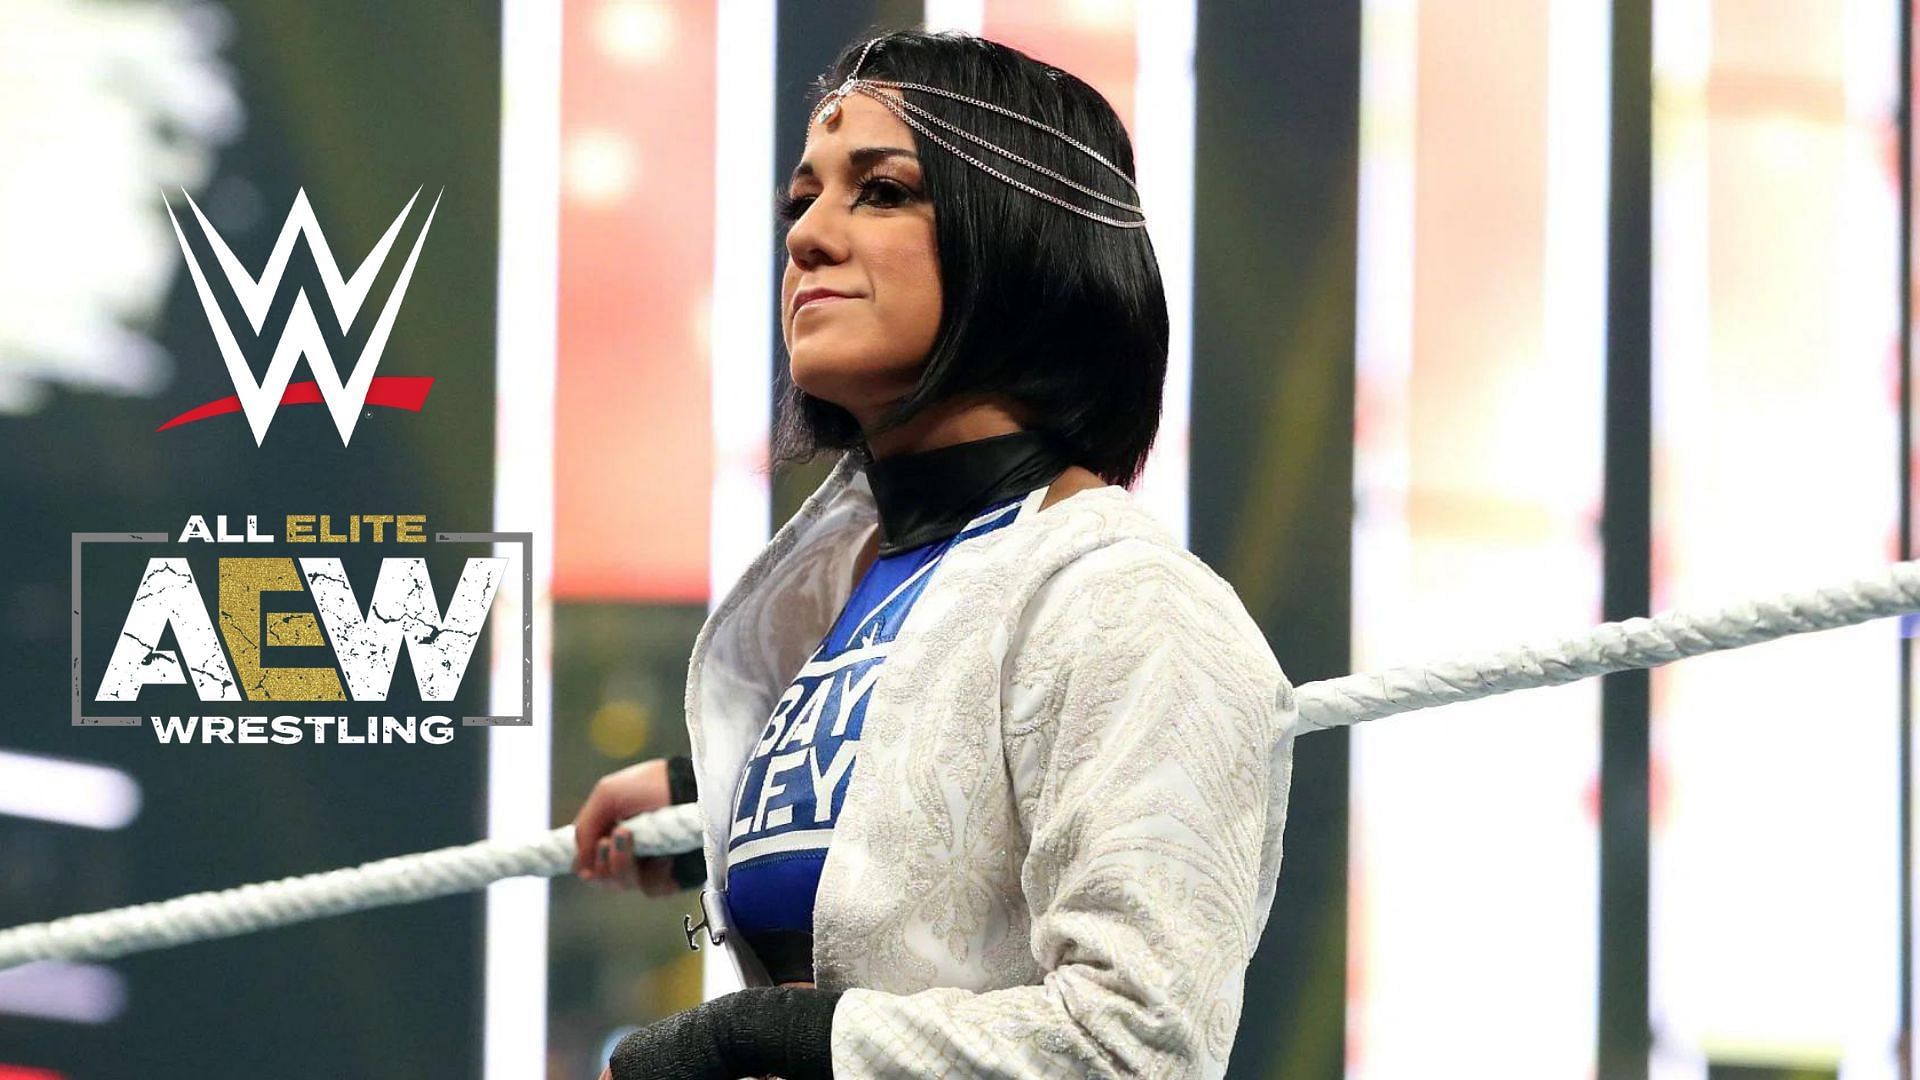 Bayley is one of the top female superstars in WWE